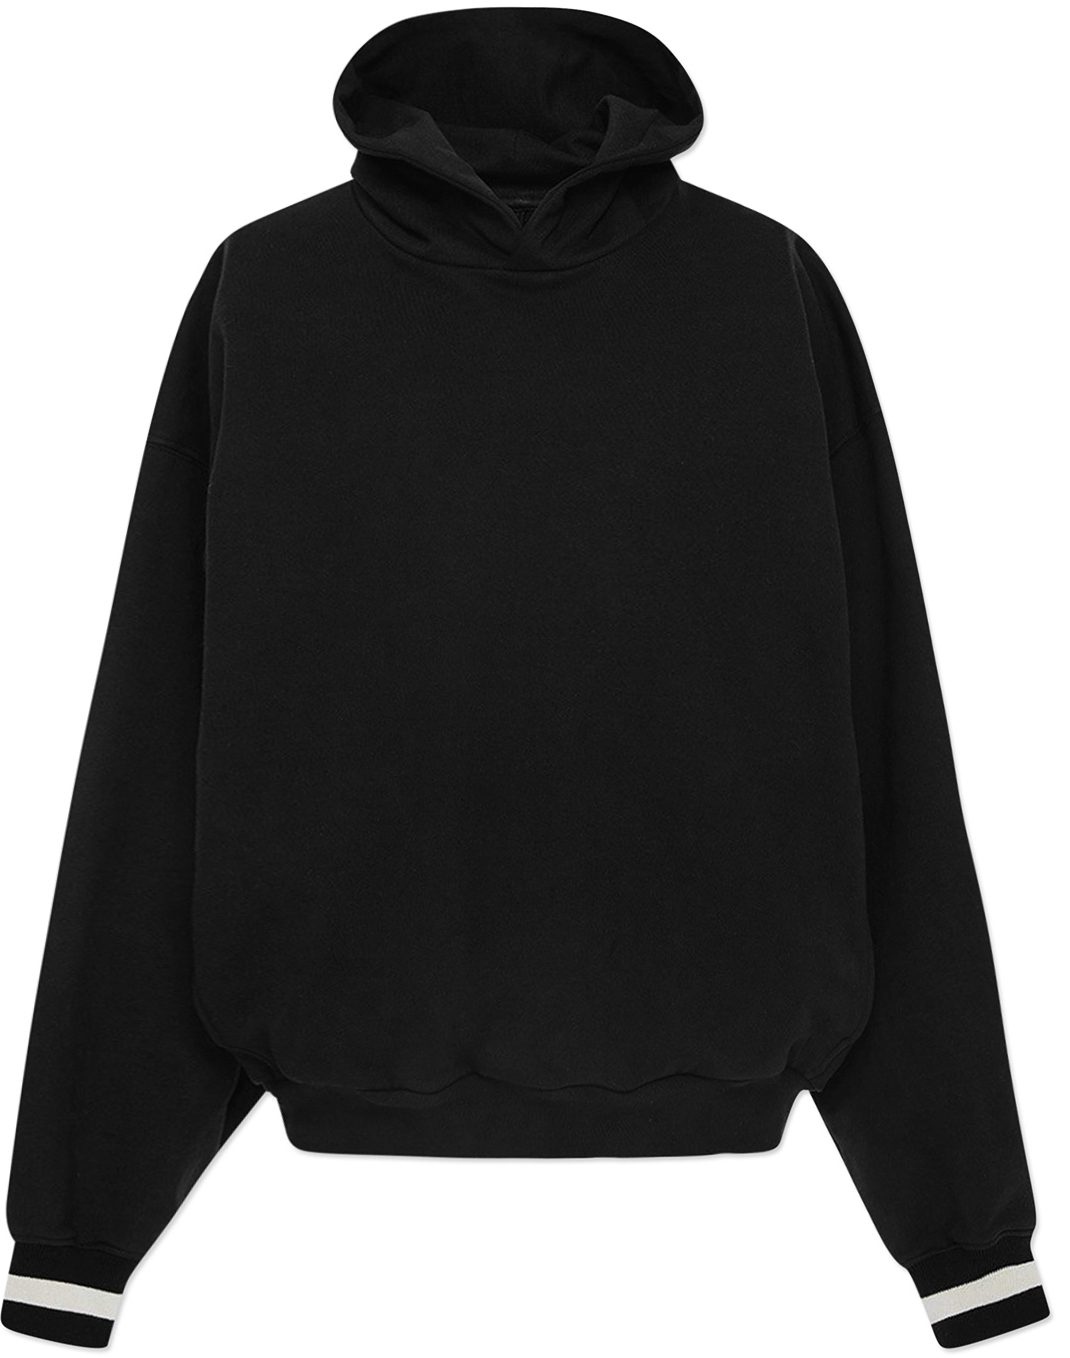 FEAR OF GOD FIFTH COLLECTION HOODIE